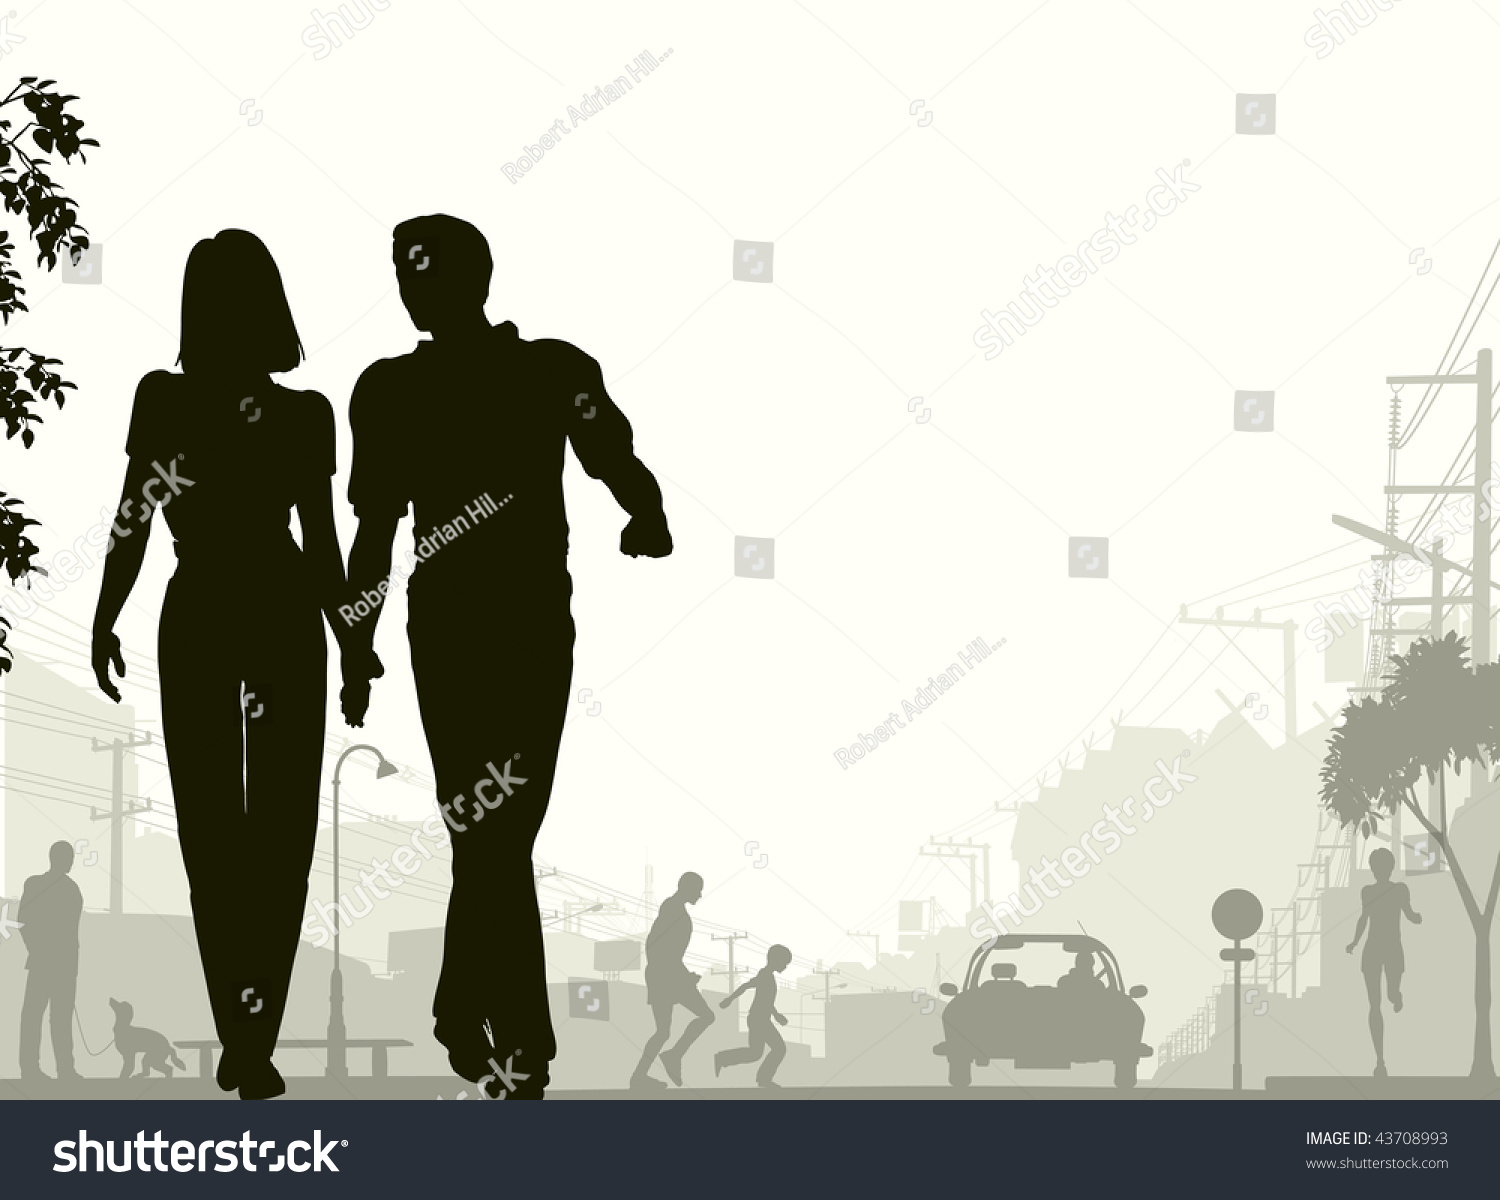 Editable Vector Silhouette Couple Walking Down Stock Vector Royalty Free Shutterstock